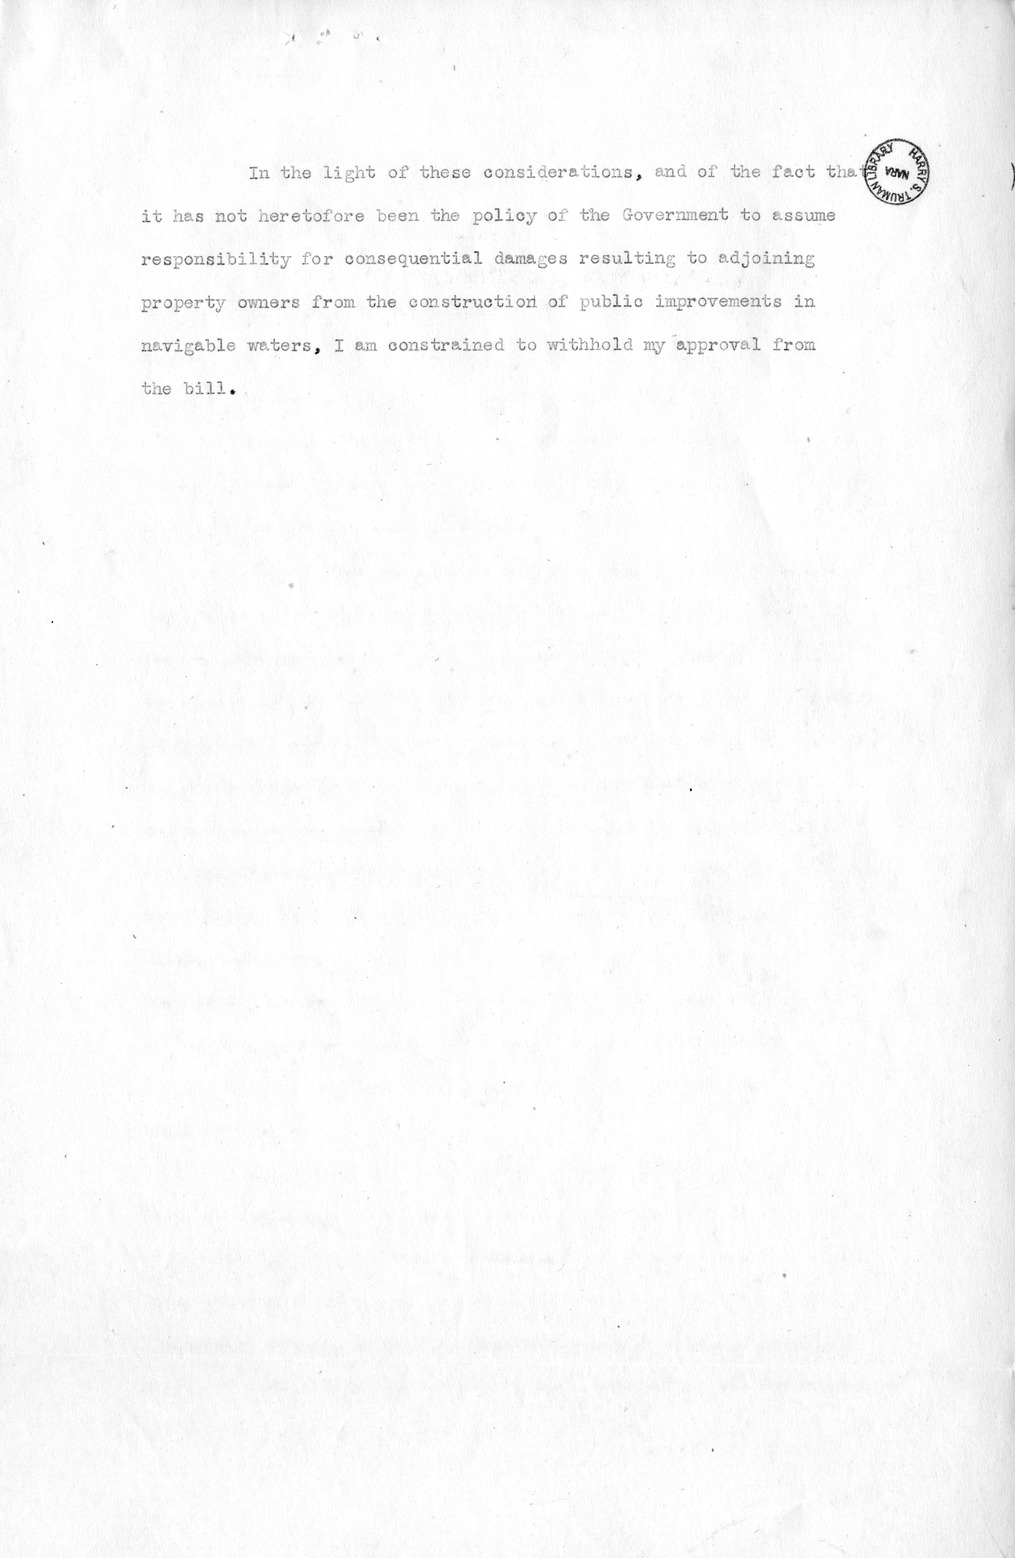 Memorandum from Harold D. Smith to M. C. Latta, H.R. 3574, For the Relief of Certain Claimants Who Suffered Loss by Flood in, at, or Near Bean Lake in Platte County, in the State of Missouri, During the Month of March 1934, with Attachments